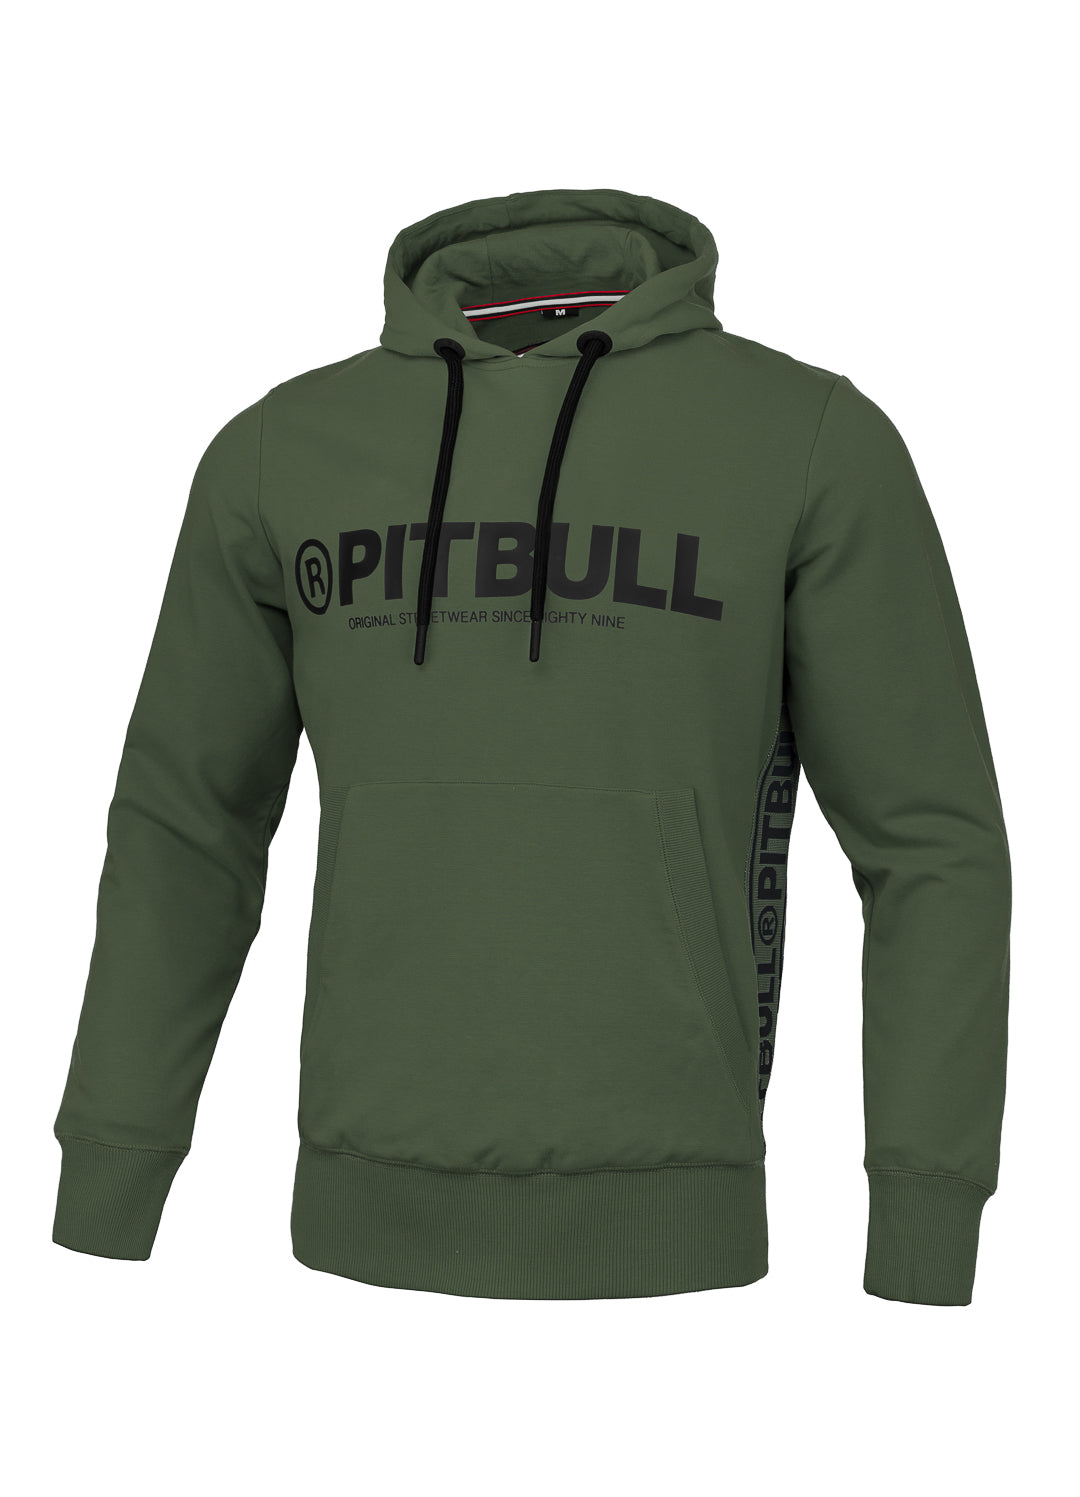 Hoodie French Terry OLYMPIC Olive - Pitbull West Coast International Store 